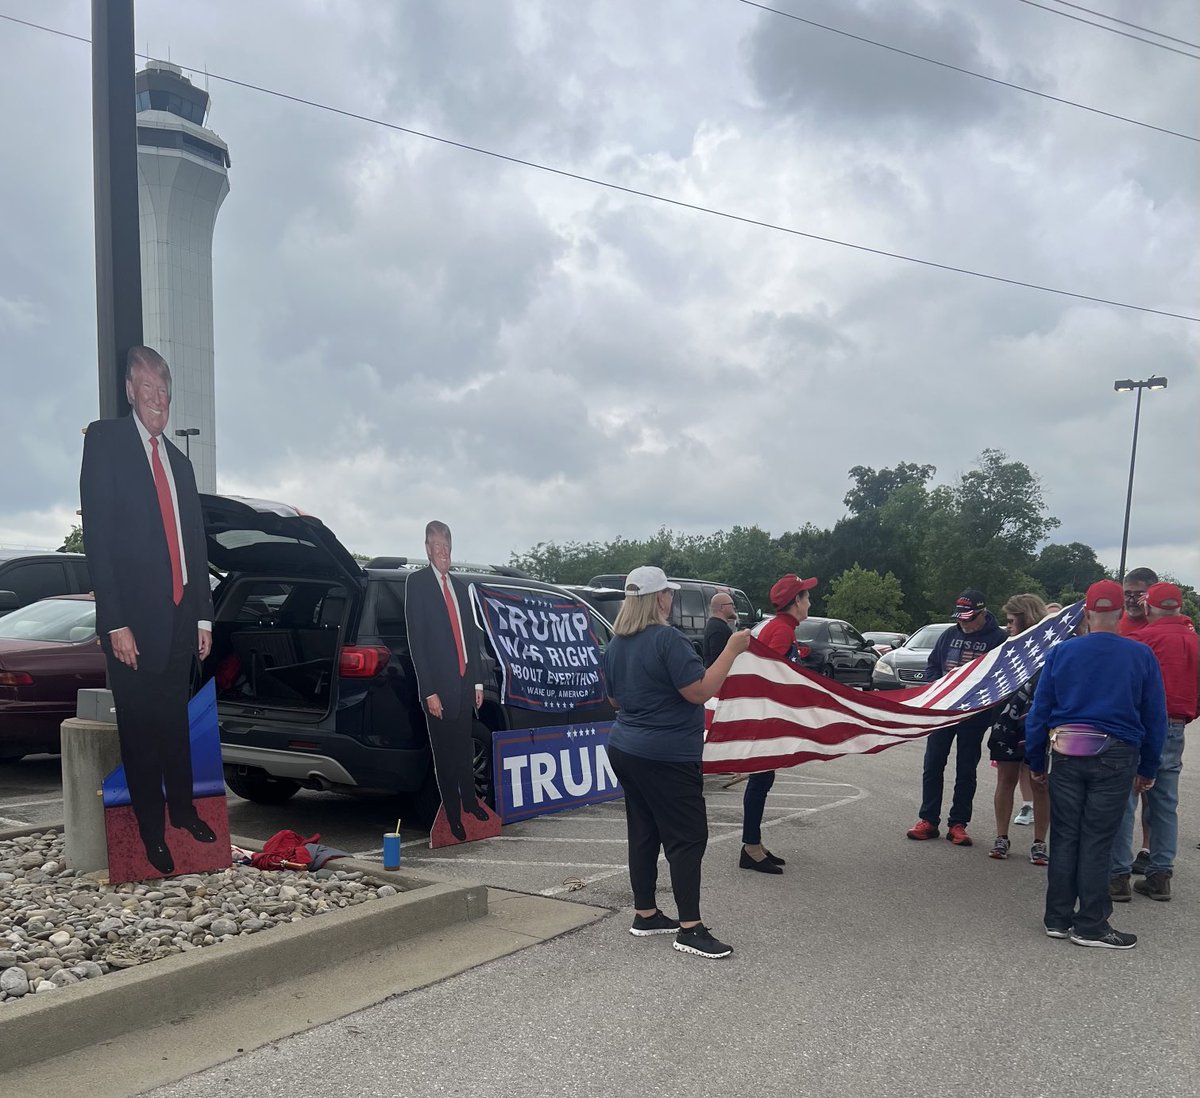 At CVG. Waiting for Trump to arrive for his Cincinnati fundraiser. Handful of supporters here in an airport parking lot…